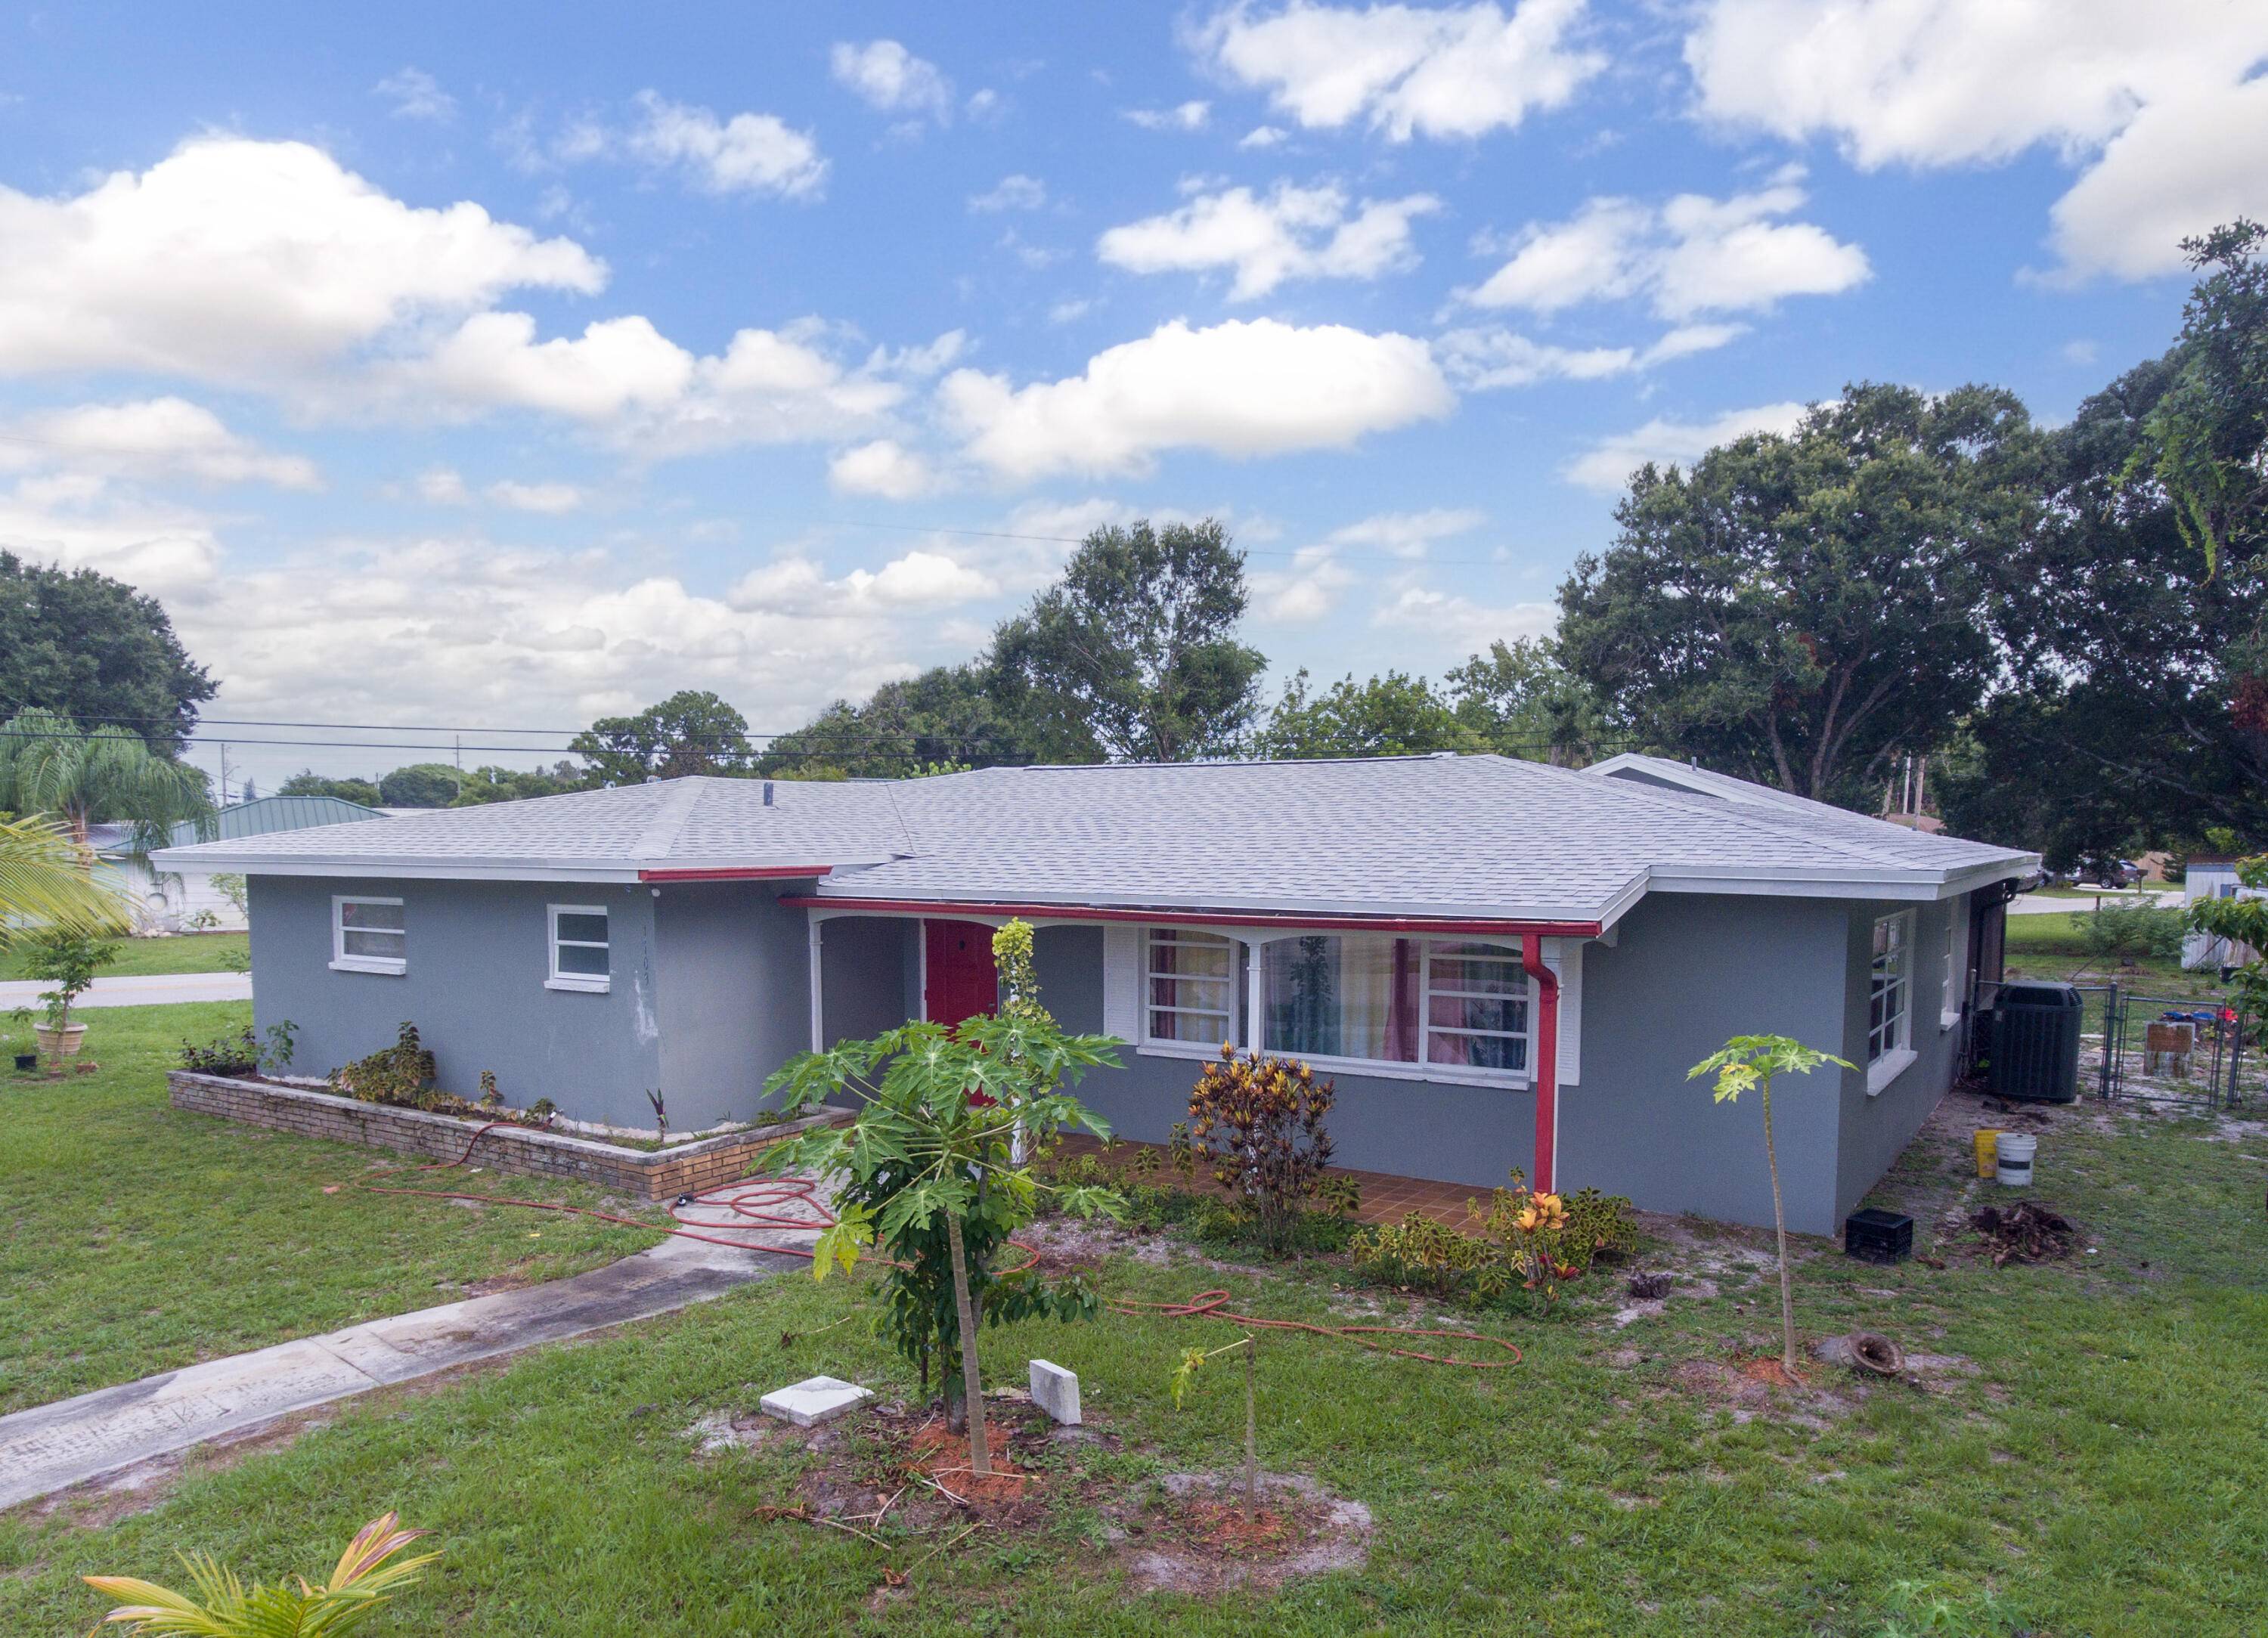 If you looking for a large home in a great neighborhood in the Fort Pierce, look no further.